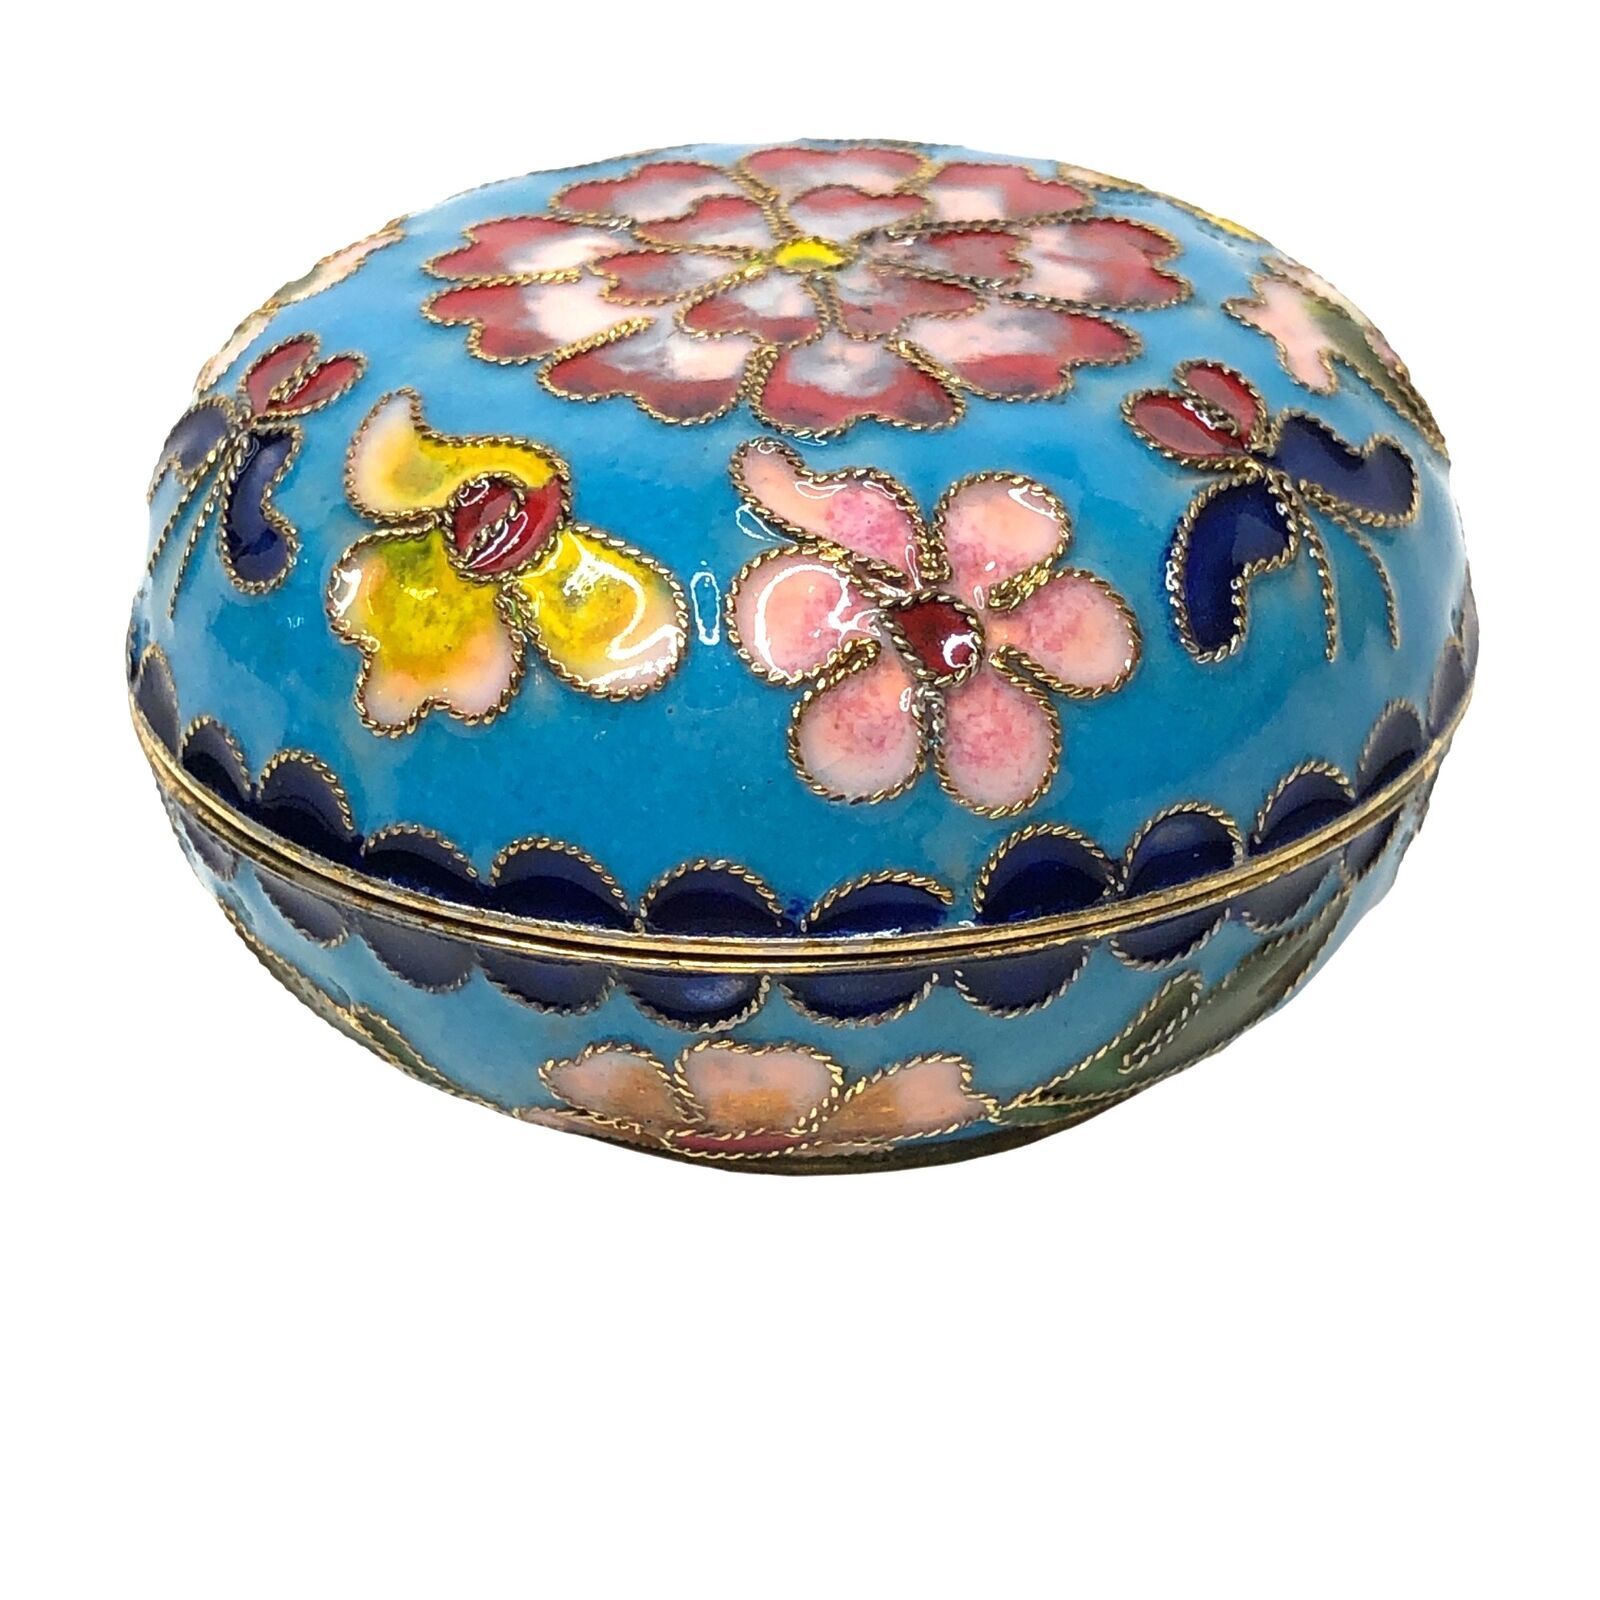 Primary image for Vintage Asian Cloisonné Trinket Box Floral Round Domed Lid Jewelry Turquoise